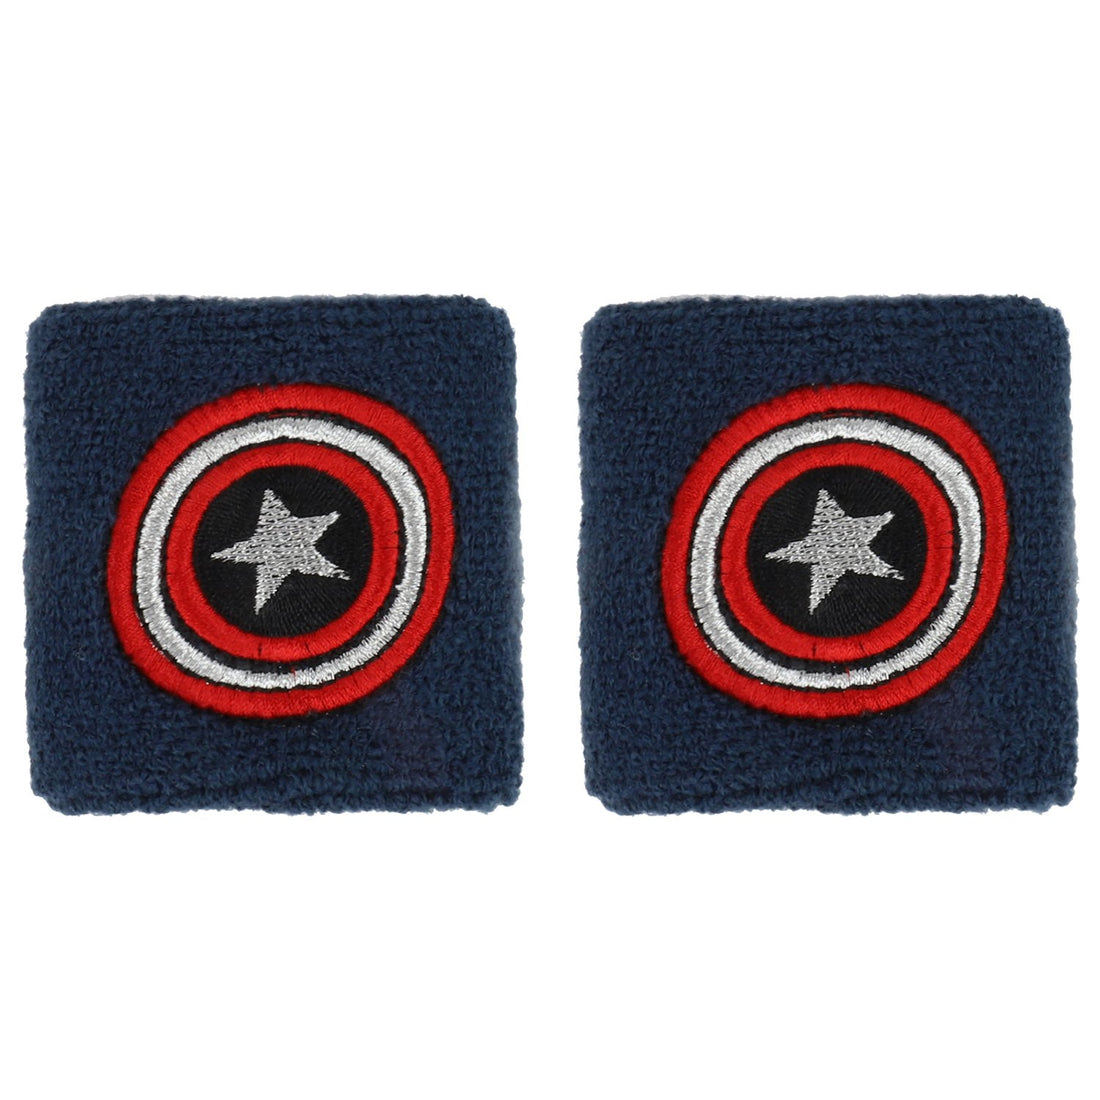 Trendy Apparel Shop Avengers Captain America Shield Embroidered Terry Wristbands 2 Pack